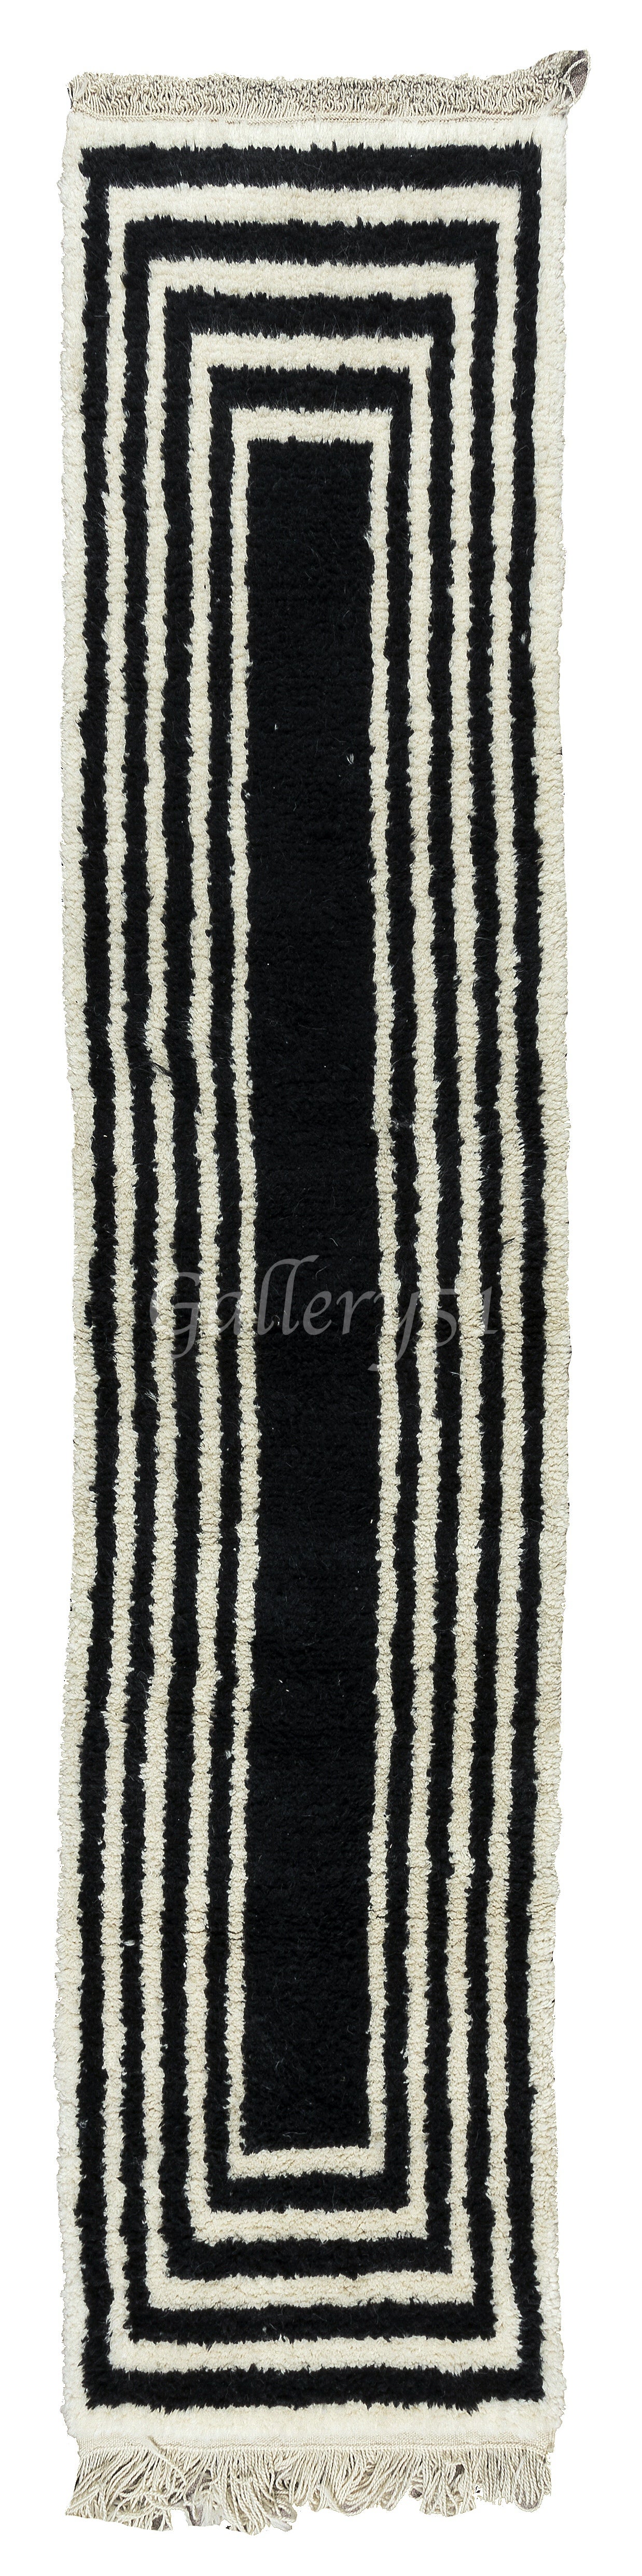 Hand-Knotted "Tulu" Runner Rug Made of Black & Cream Wool, Custom Options Avail.